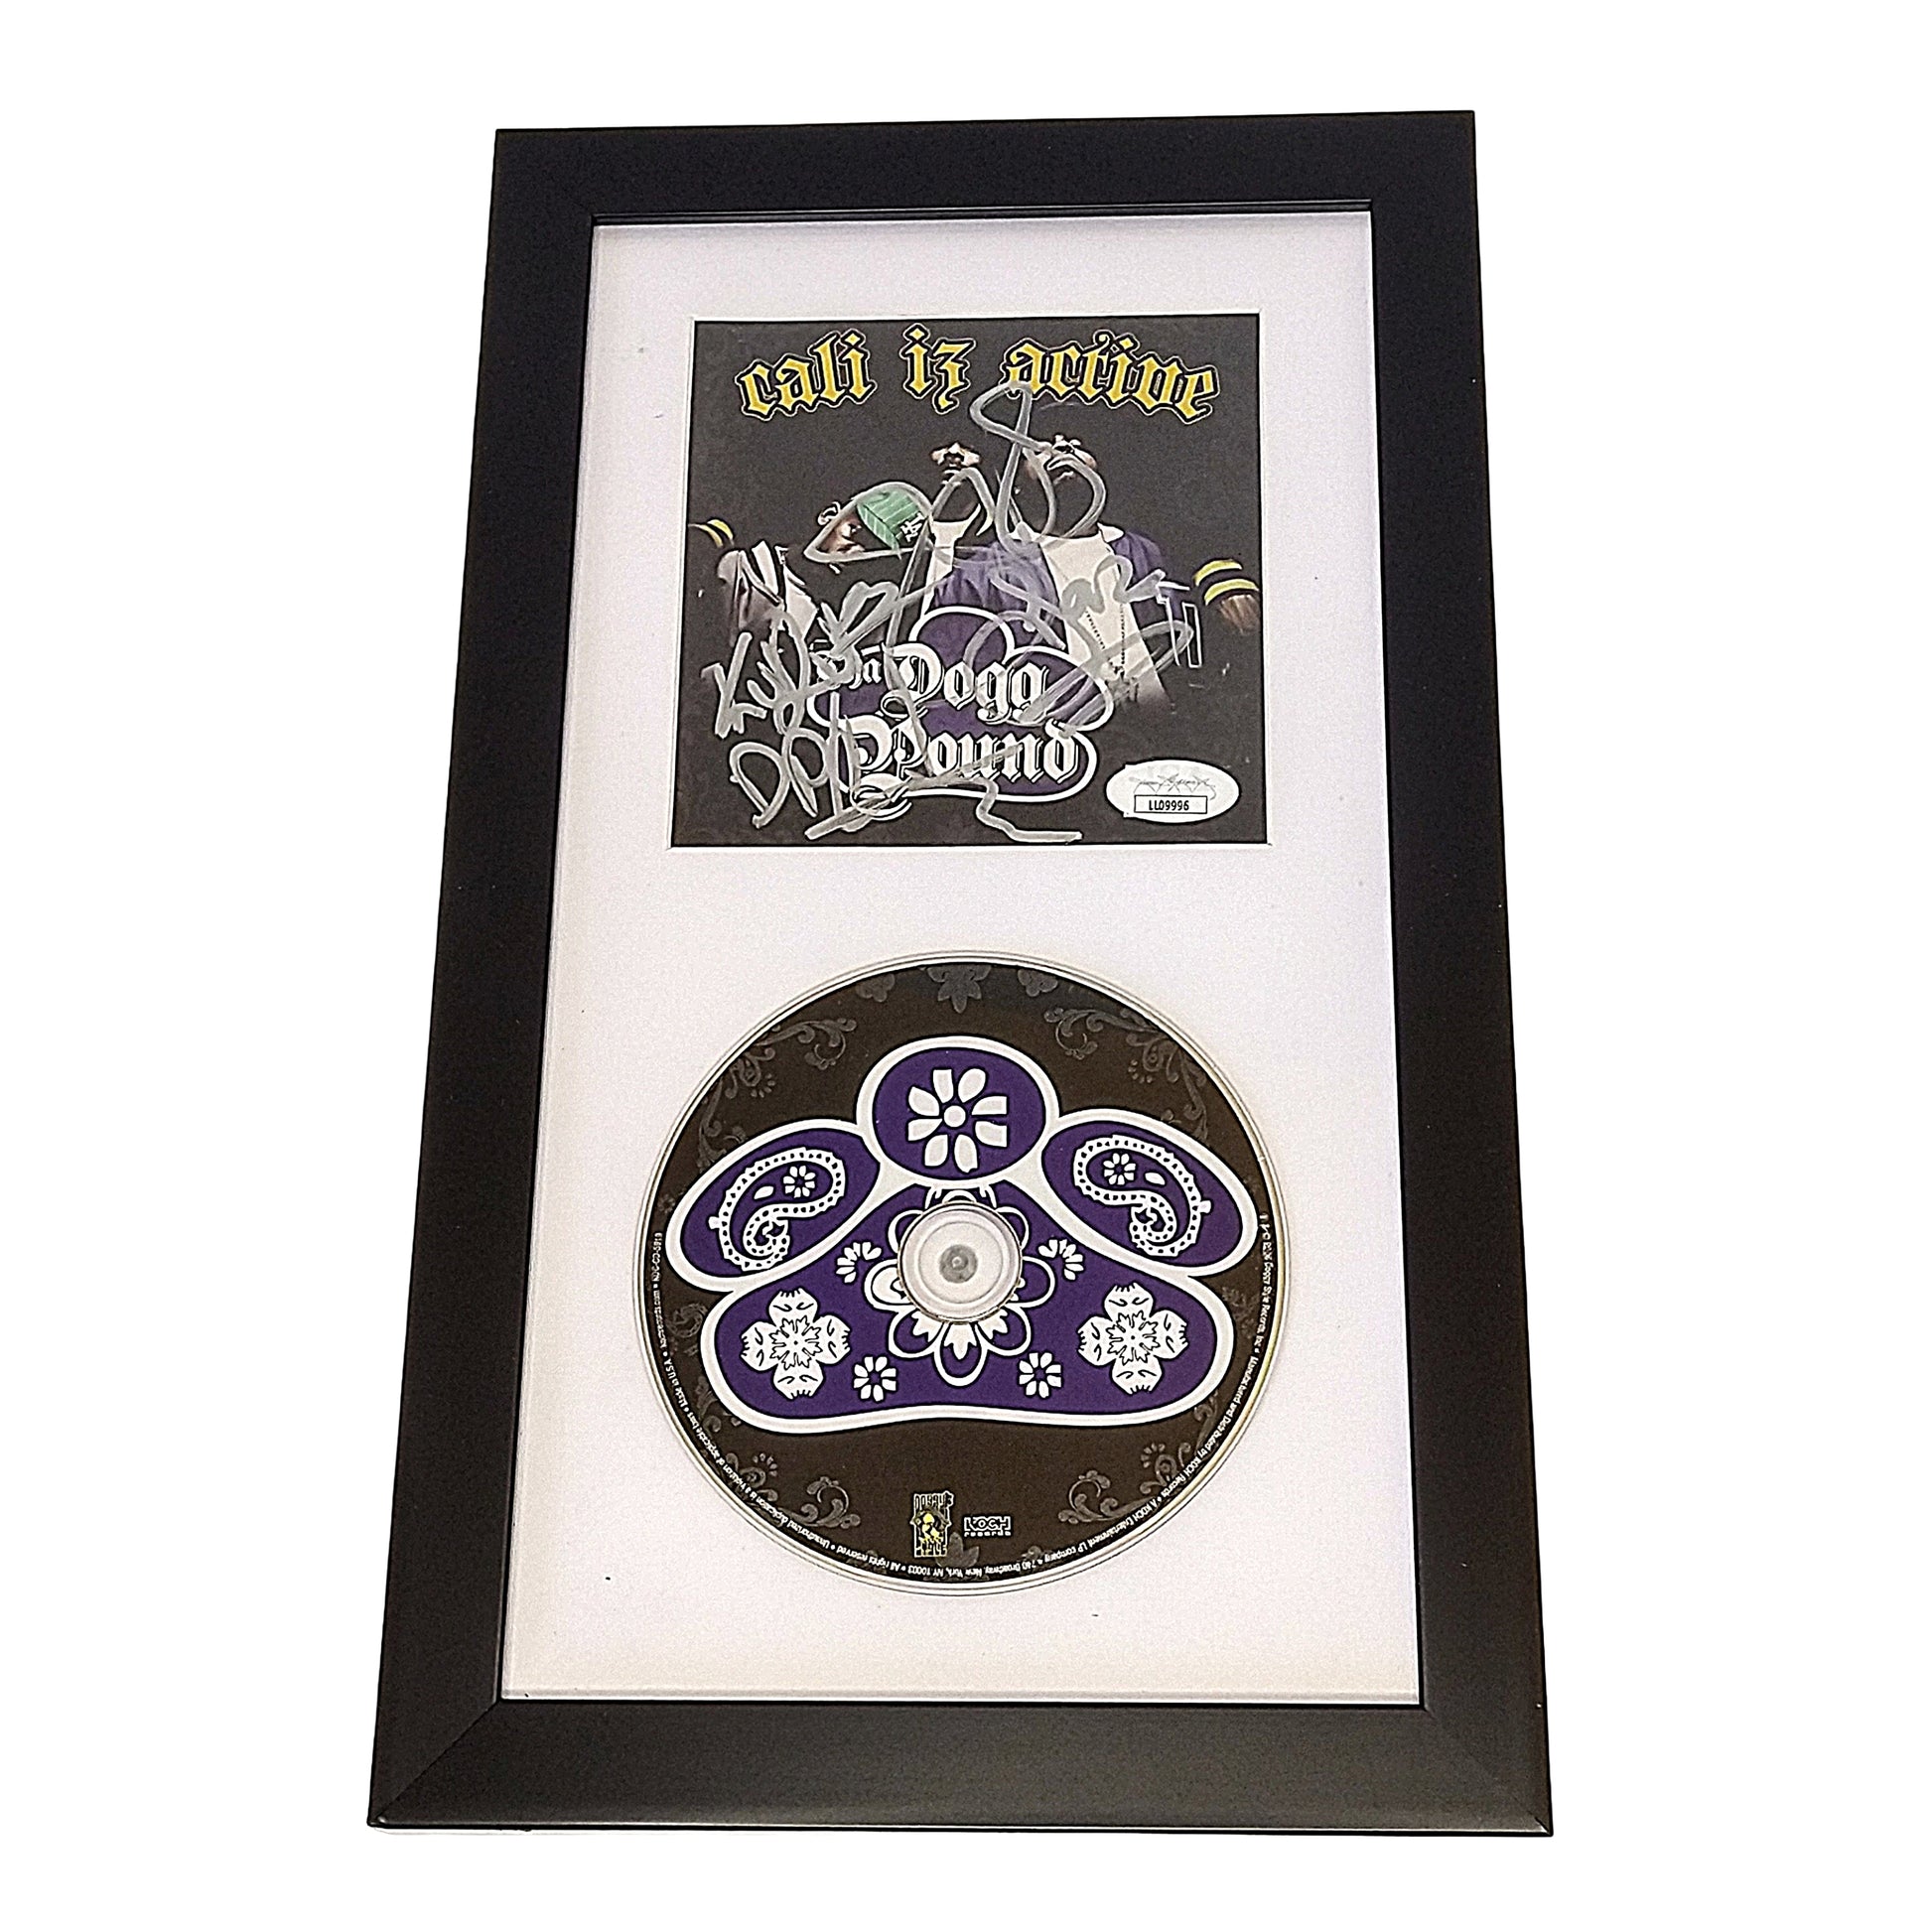 Music- Autographed- Snoop Dogg, Kurupt and Daz Dillinger Signed Dogg Pound DPG Cali Iz Active Framed Compact Disc Cover Booklet with Disc- JSA Authentication- 104